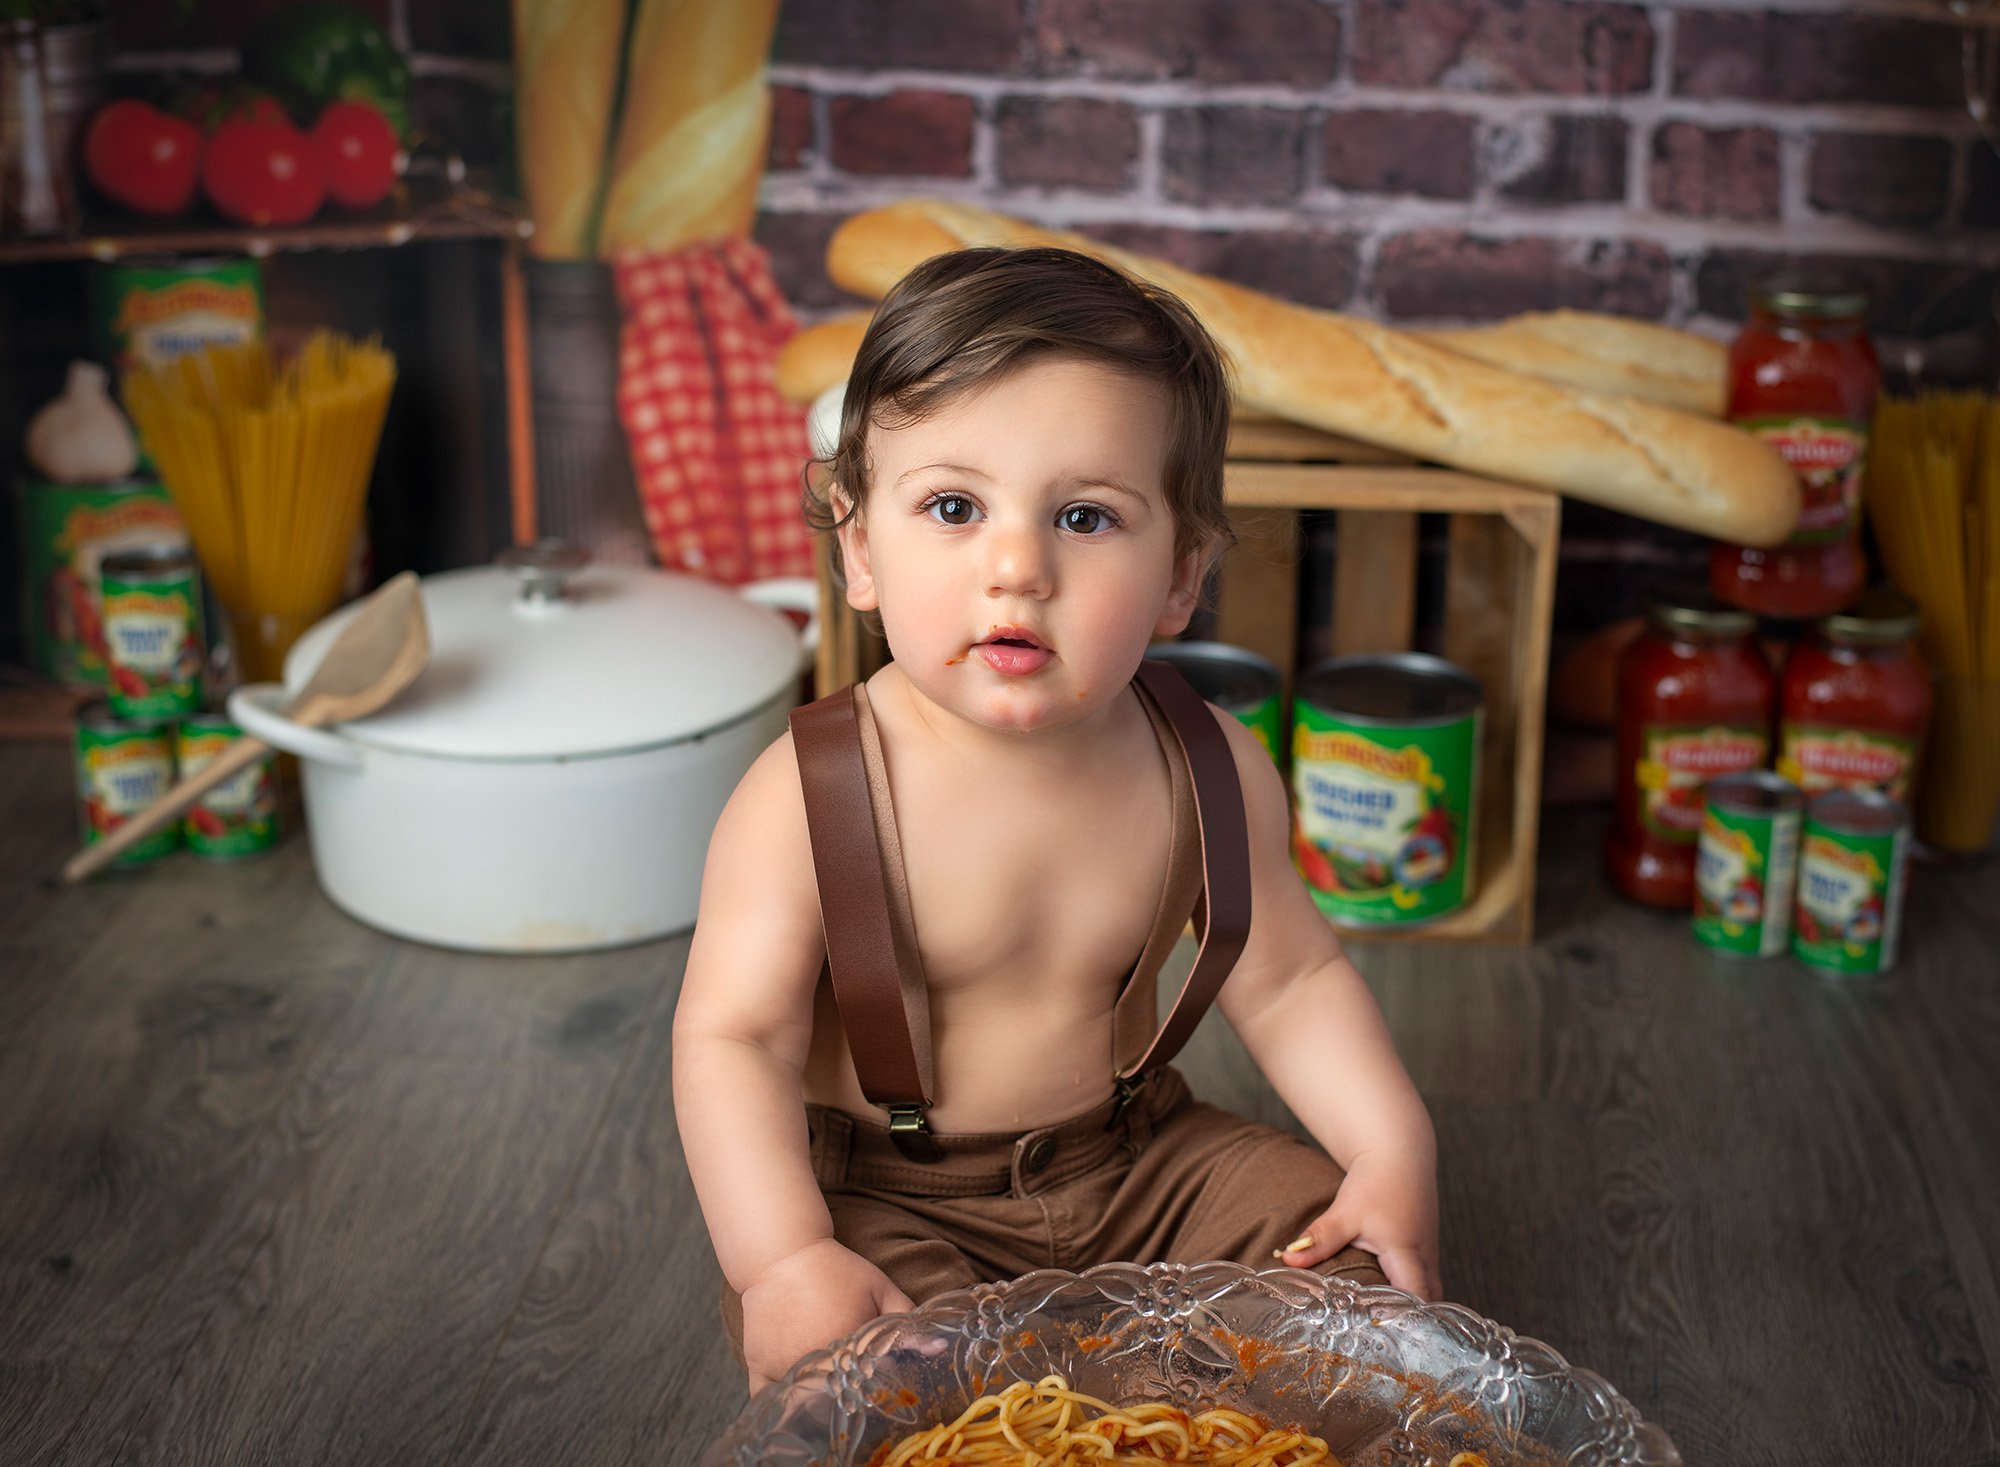 one year old boy wearing overalls with Italian bread and jars of sauce in the background